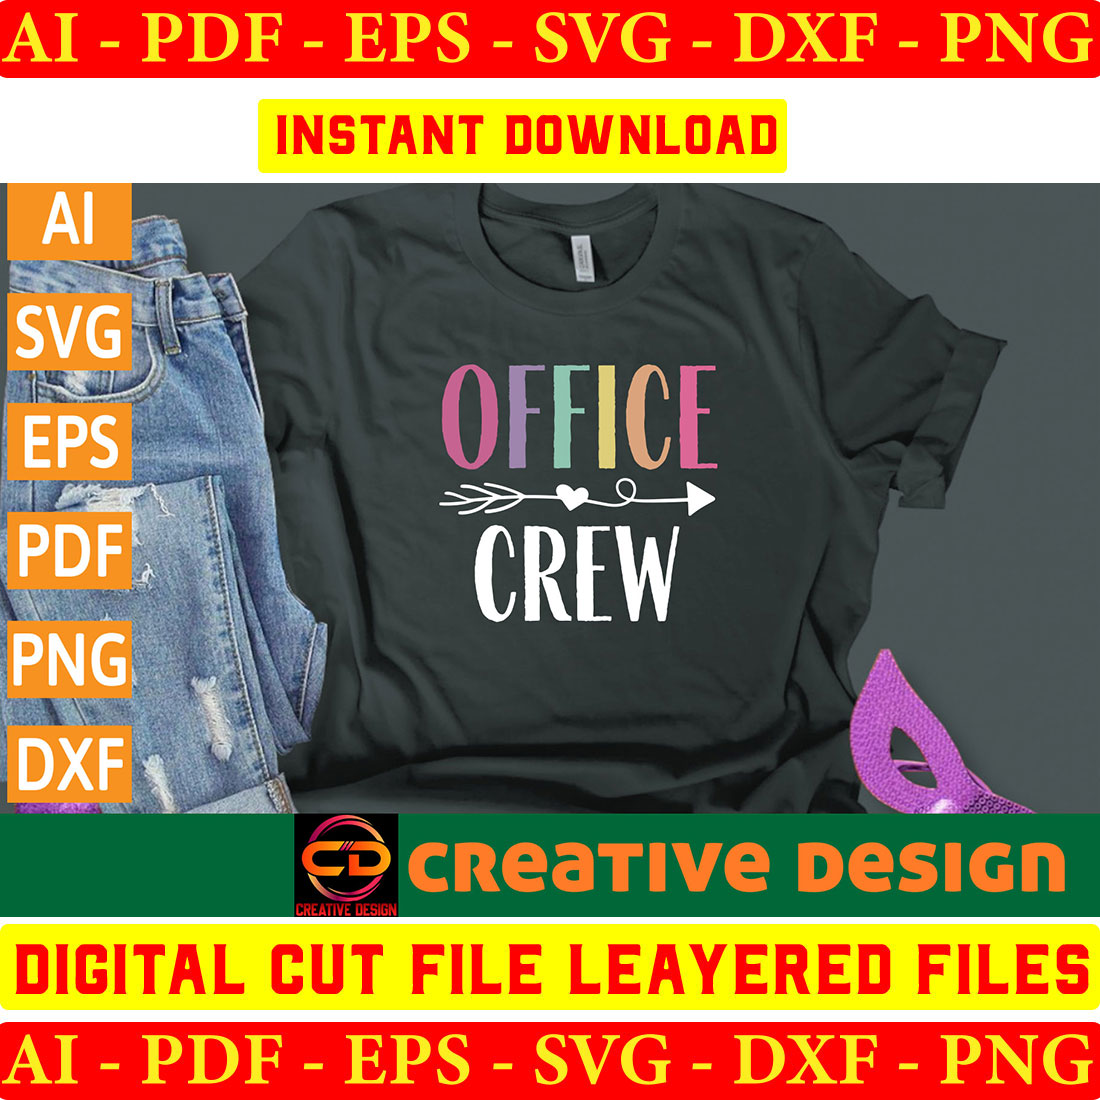 T - shirt with the words office crew on it.